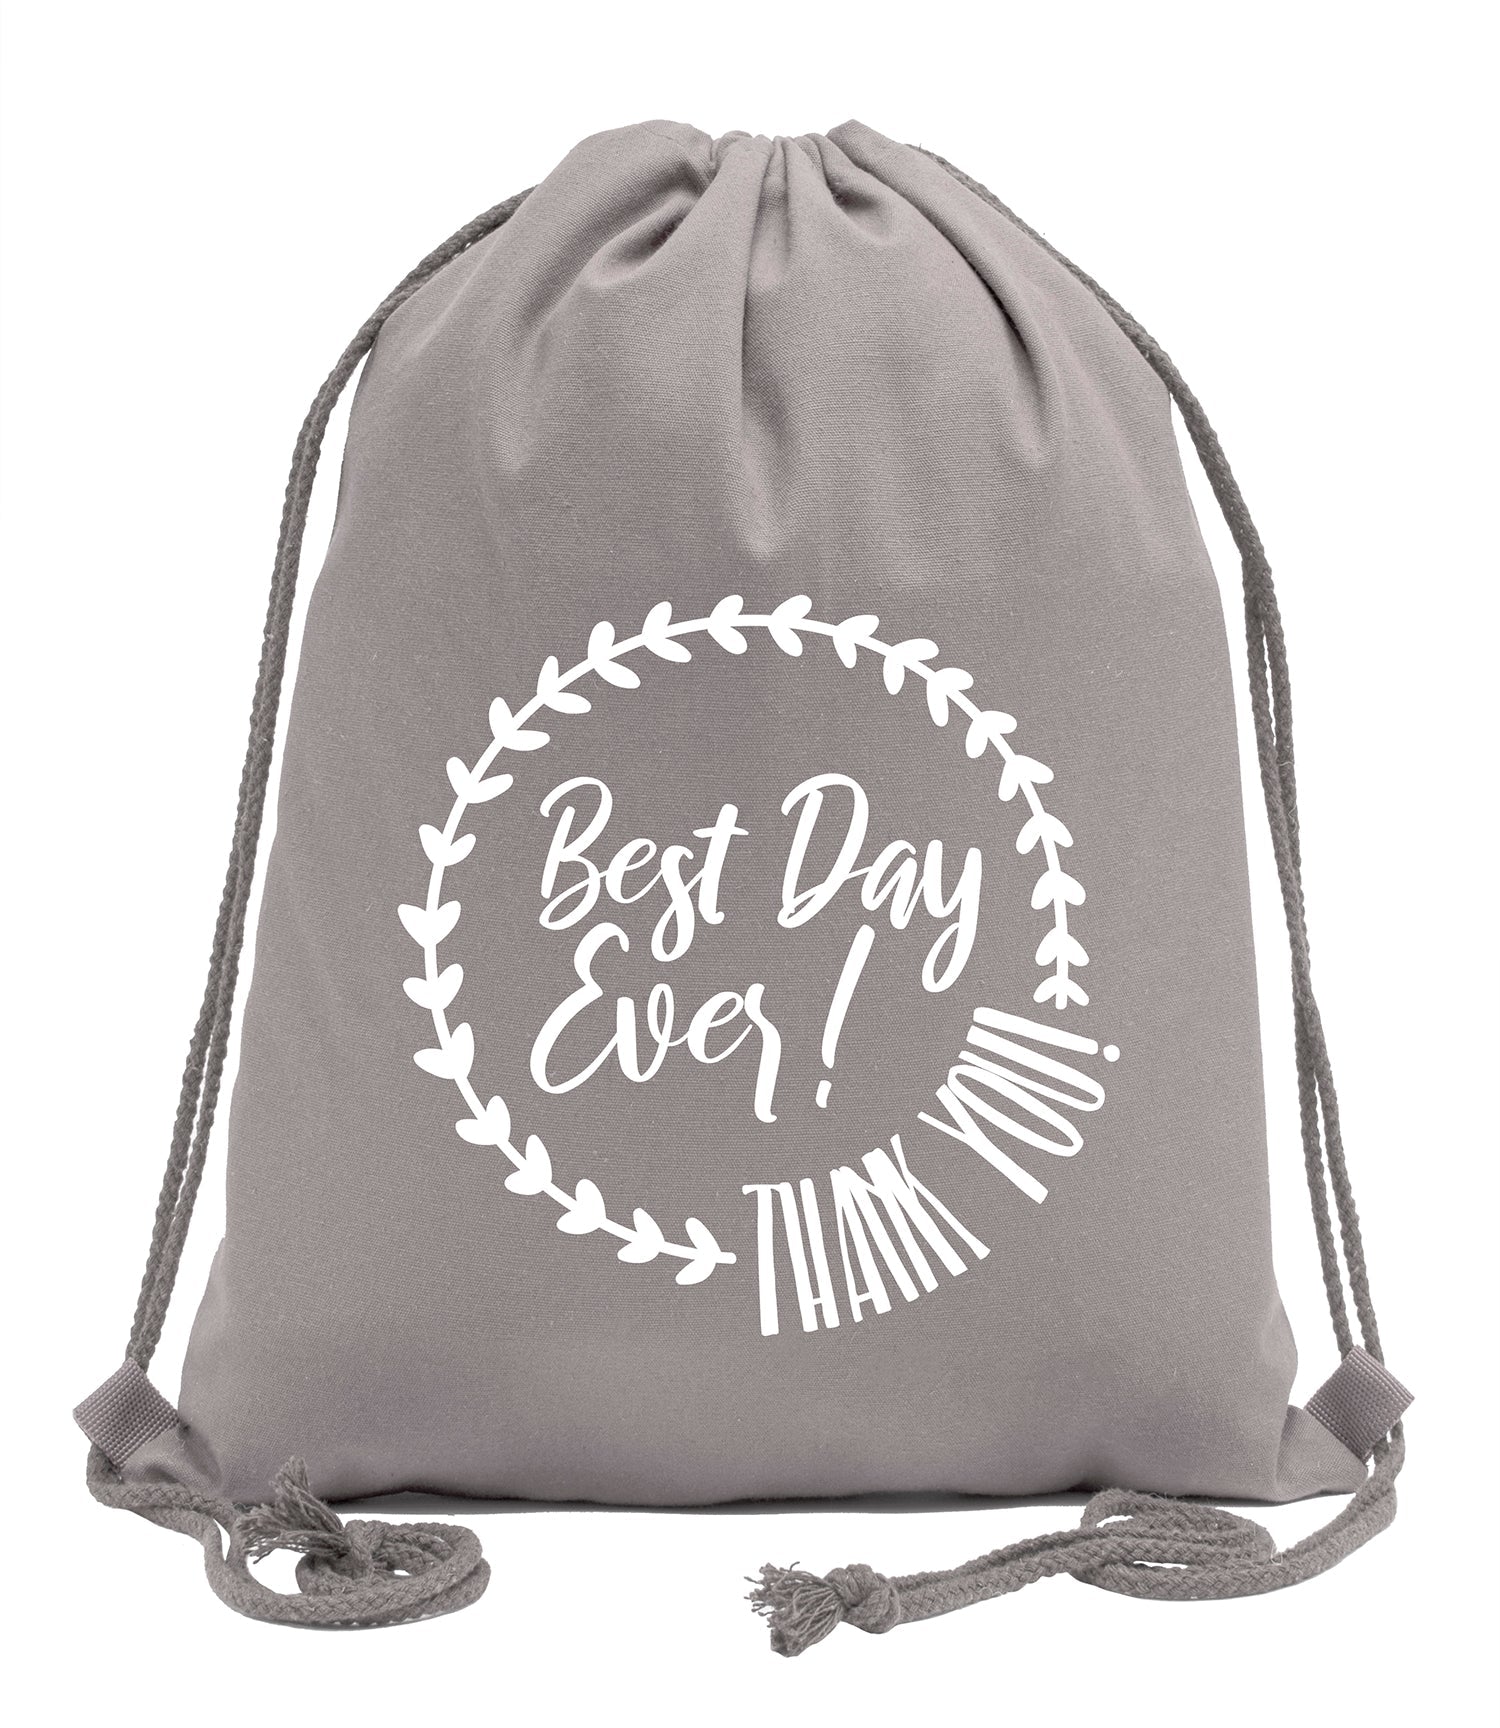 Best Day Ever! Thank You! Cotton Drawstring Bag - Mato & Hash